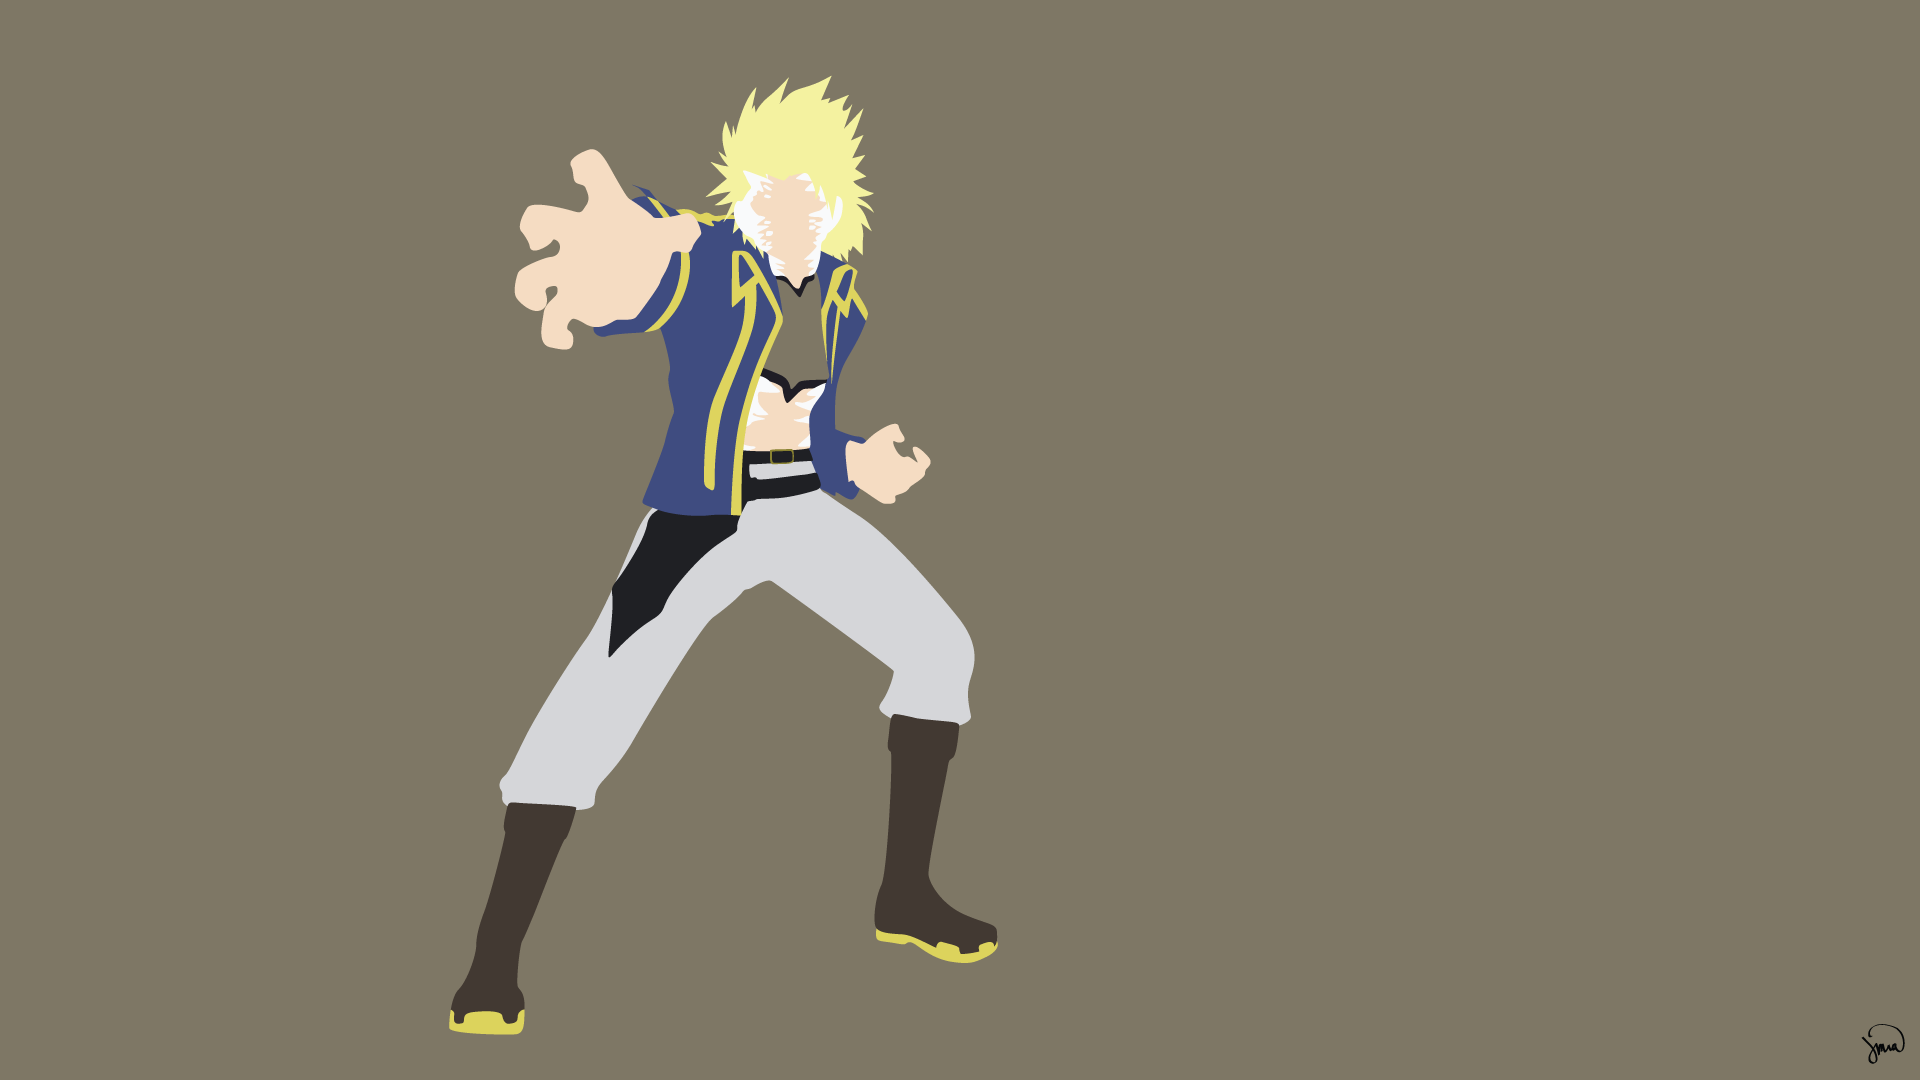 Sting Eucliffe Fairy Tail Minimalistic Wallpaper by greenmapple17. Daily Anime Art